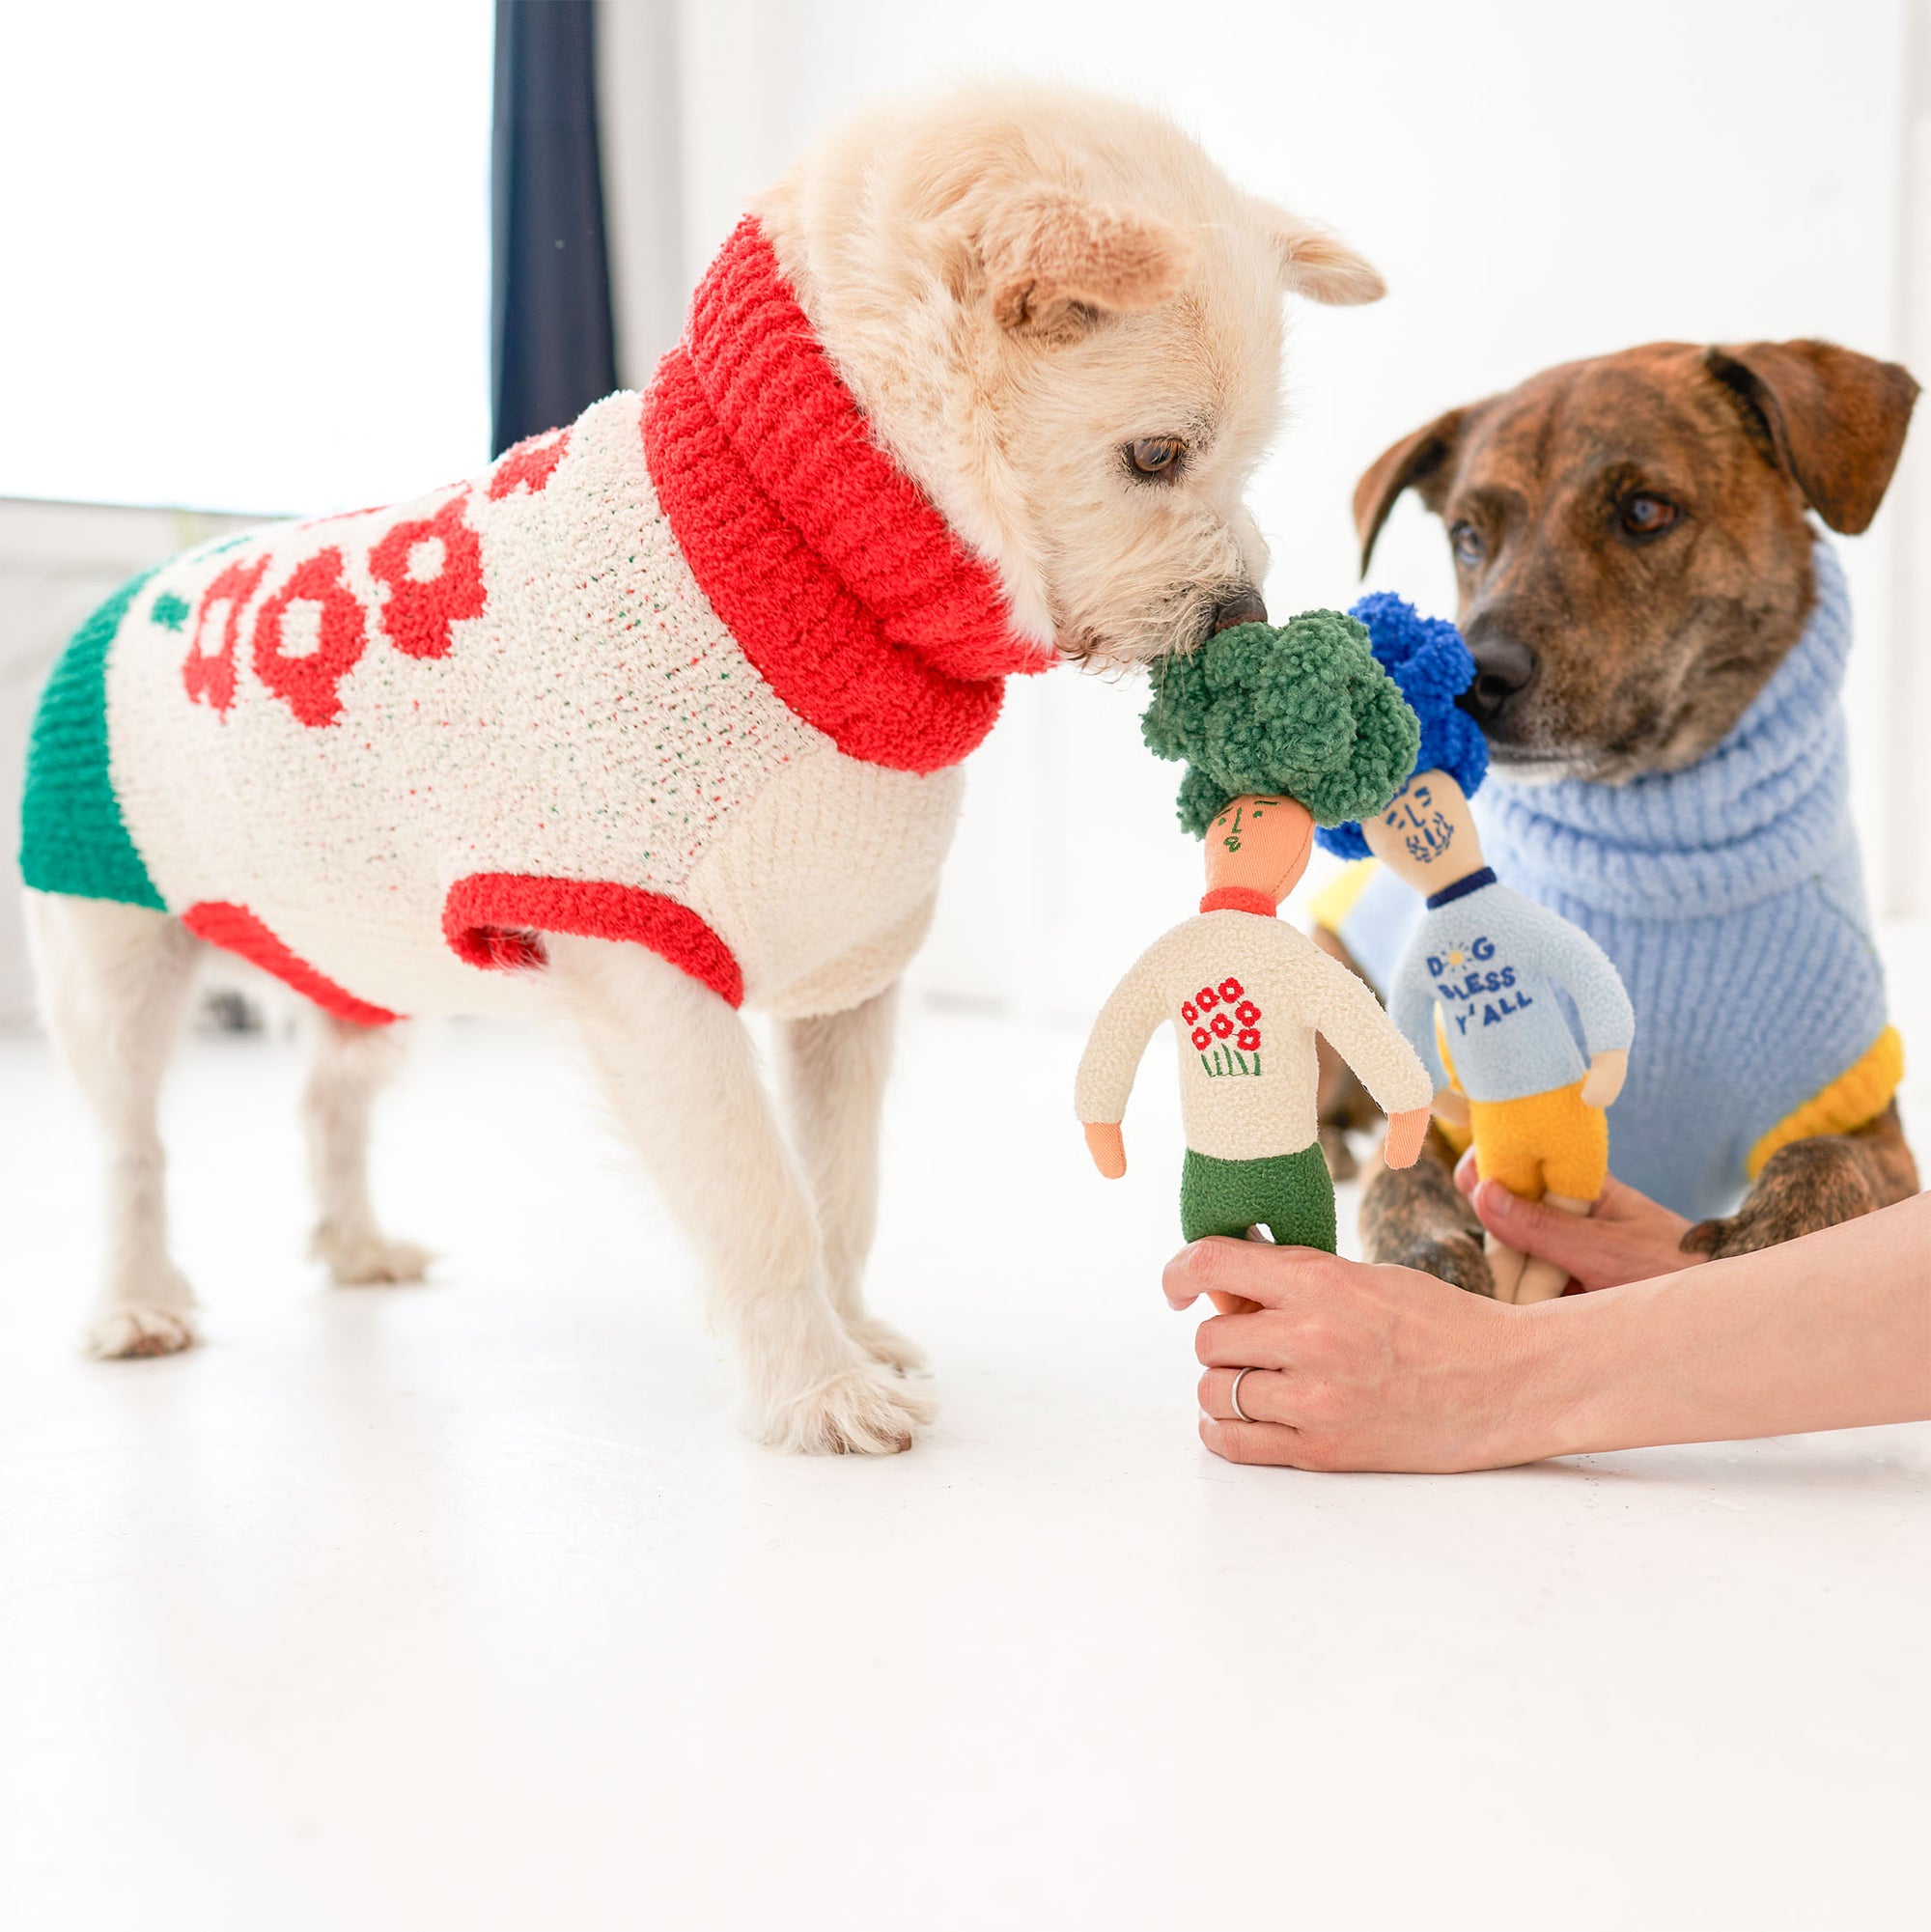  The photograph shows two dogs showing interest in two different nosework toys being held by a person. The dog on the left, clad in a red and white sweater, is sniffing a green-haired toy, while the dog on the right, wearing a blue sweater, looks at a blue-haired toy. The toys have distinctive, colorful designs, and this setting likely aims to engage the dogs' sense of smell and problem-solving skills in a bright, airy environment.